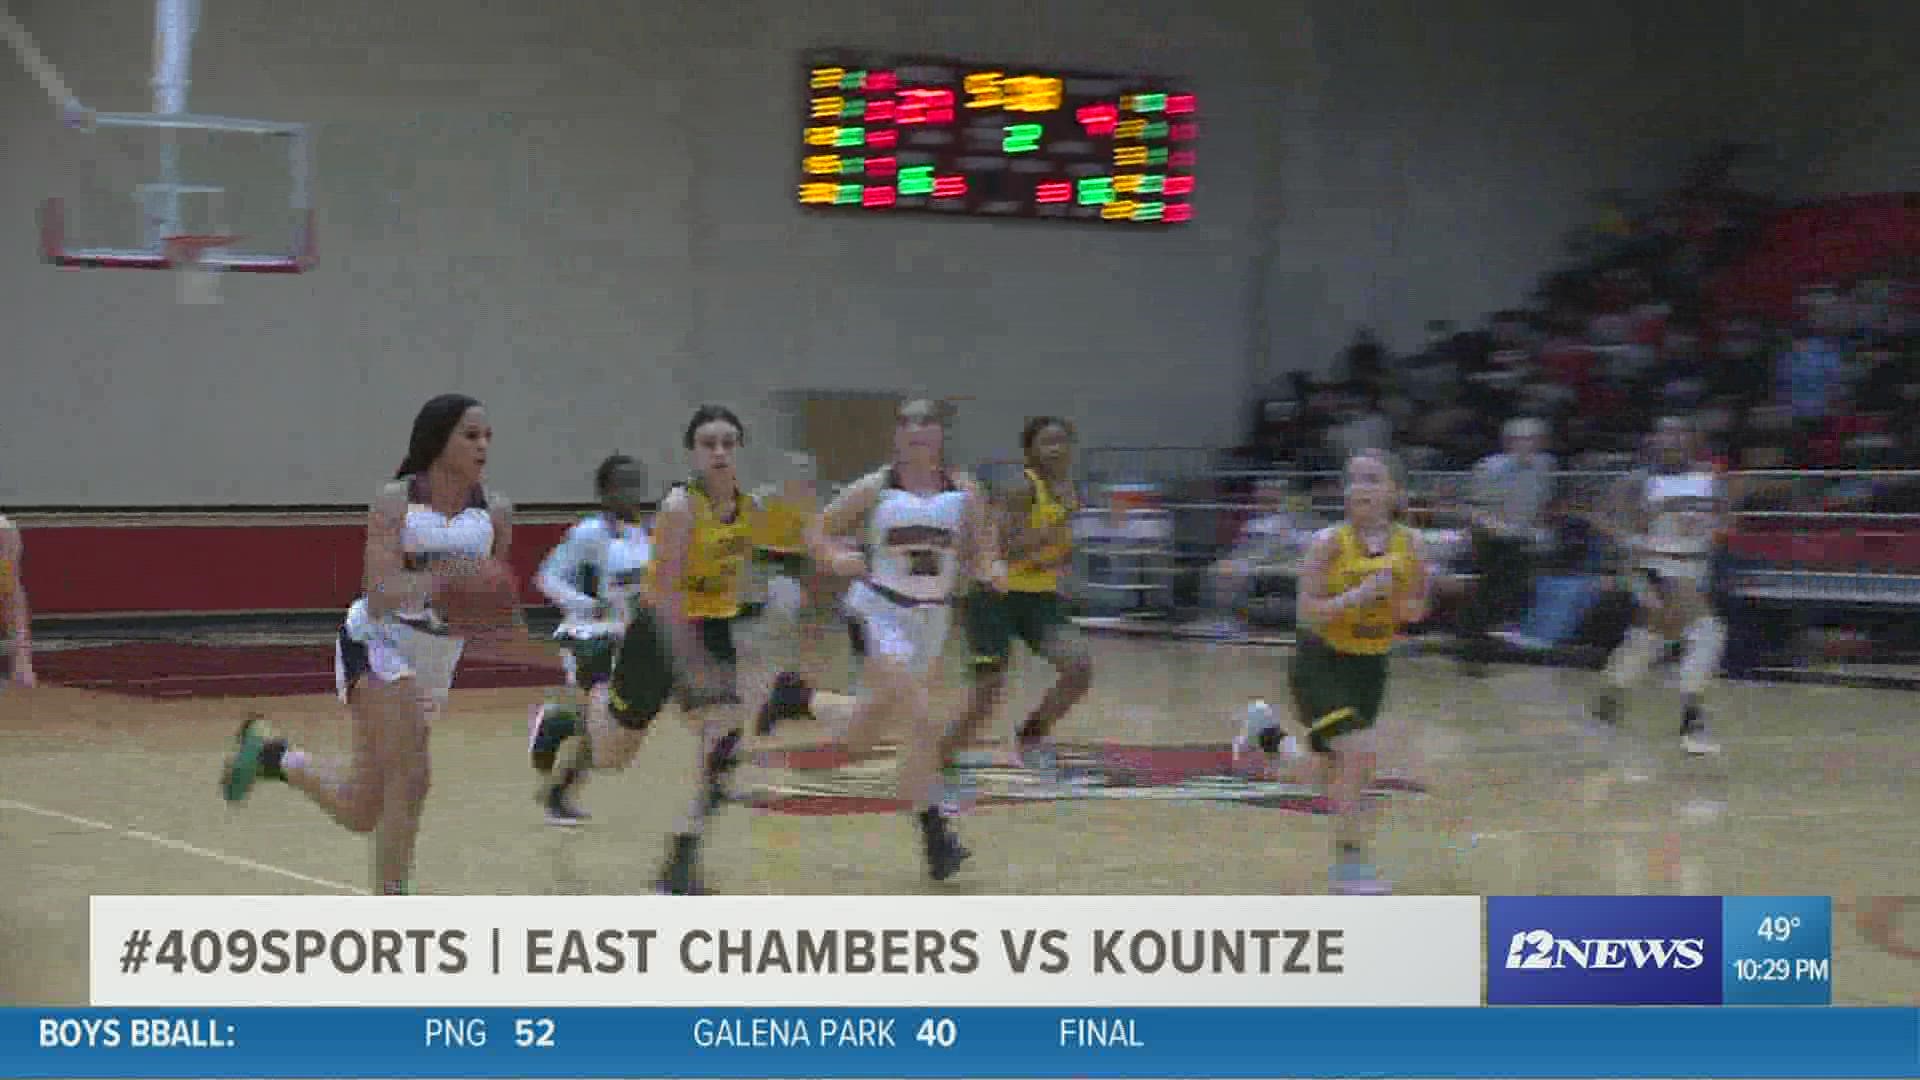 Kountze Lionettes cruise past East Chambers